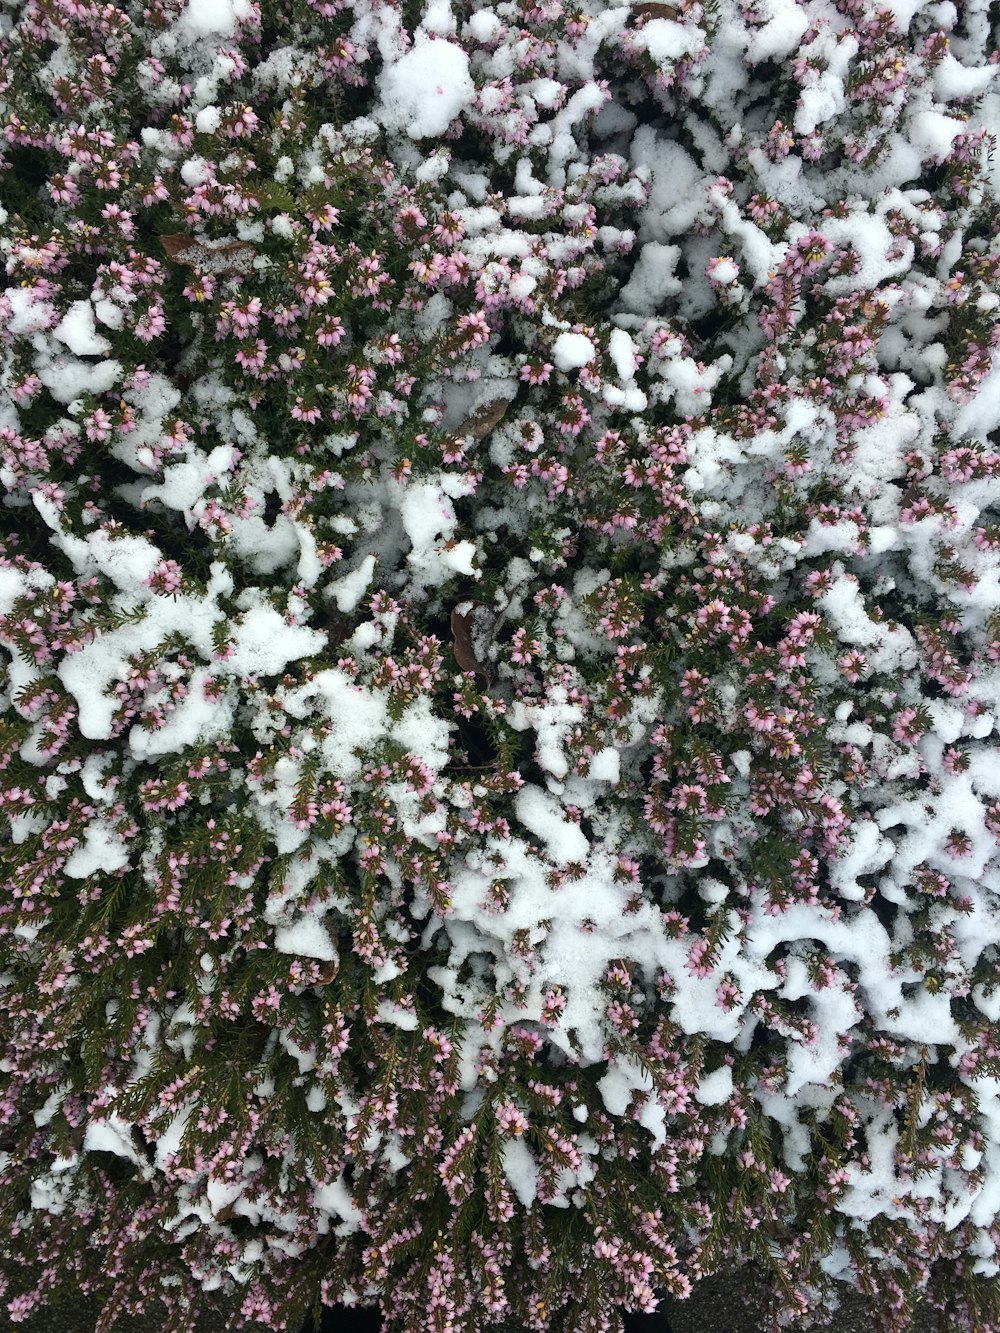 a bush covered in snow and pink flowers